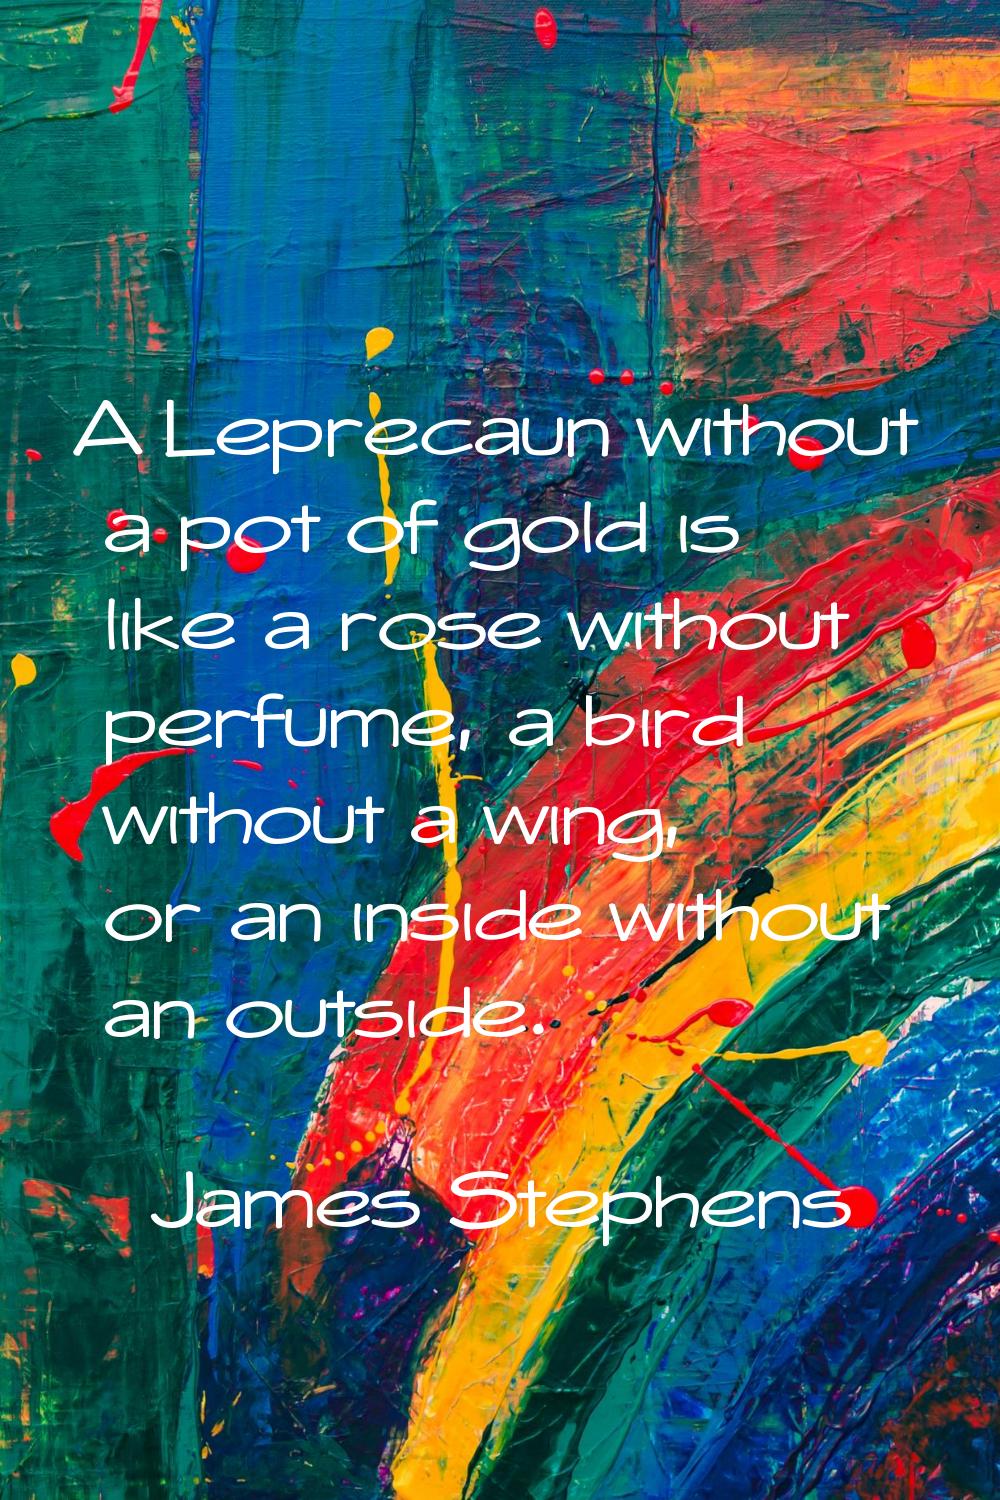 A Leprecaun without a pot of gold is like a rose without perfume, a bird without a wing, or an insi